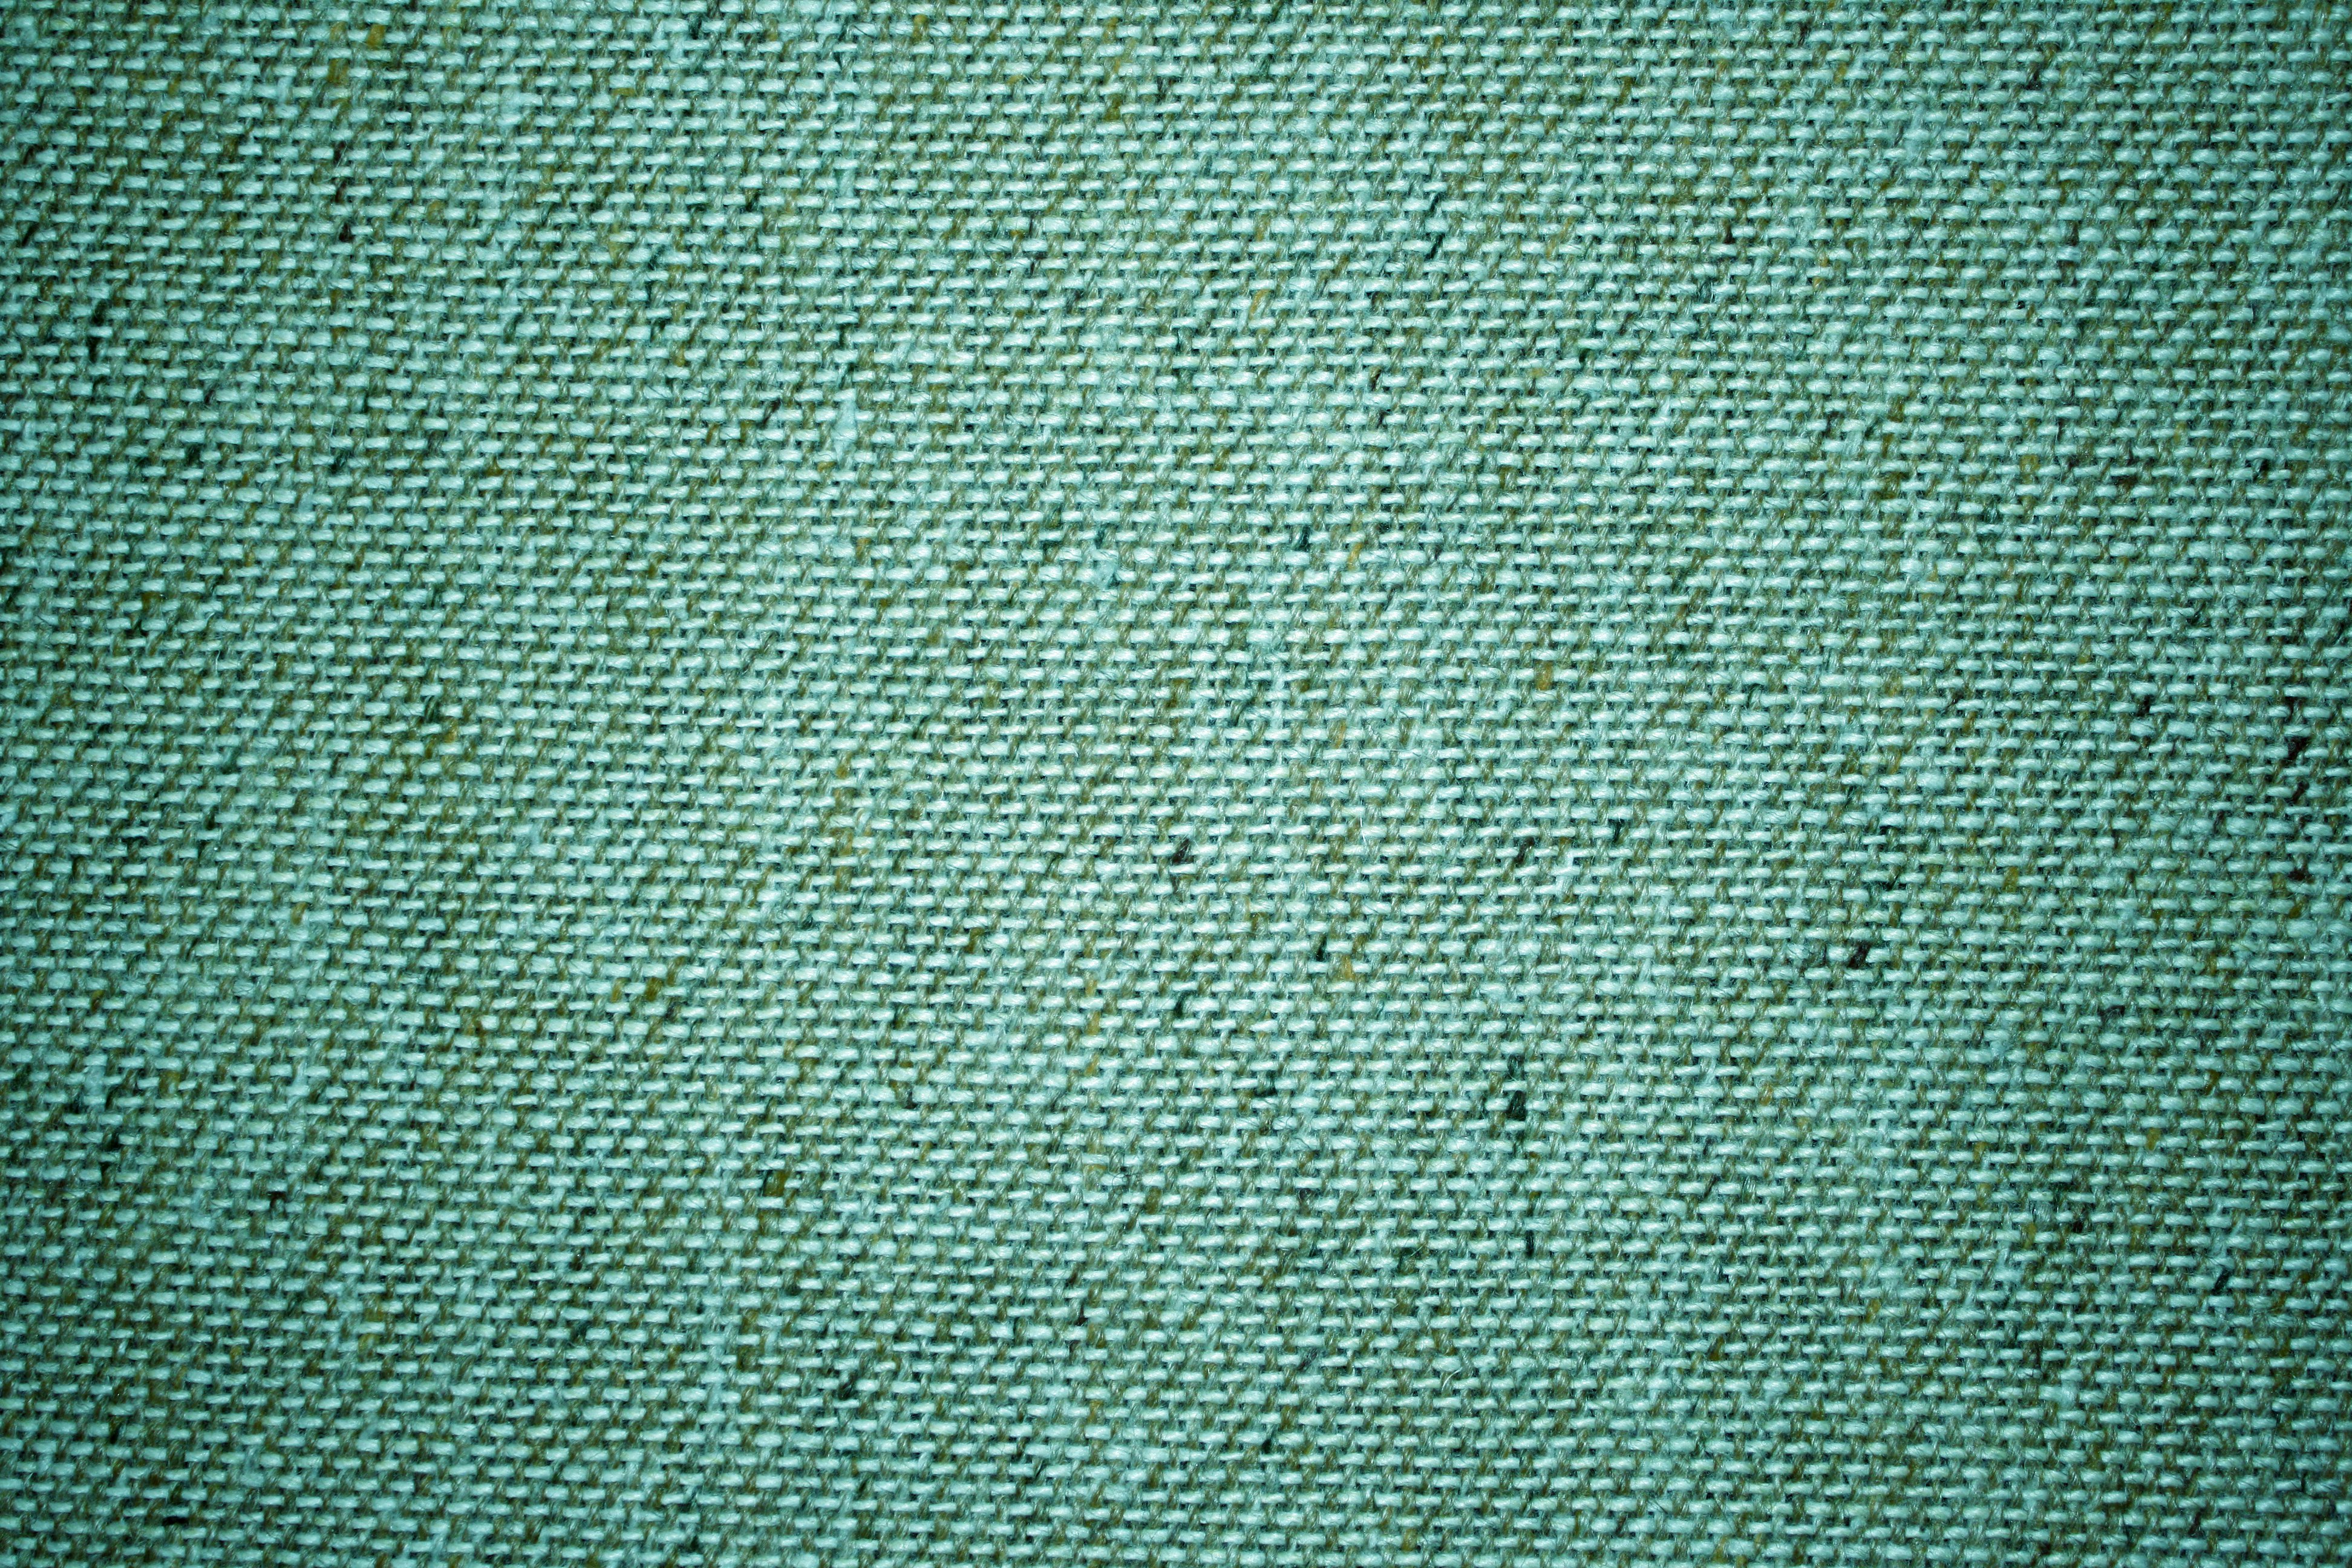 Teal Green Upholstery Fabric Close Up Texture Picture | Free Photograph